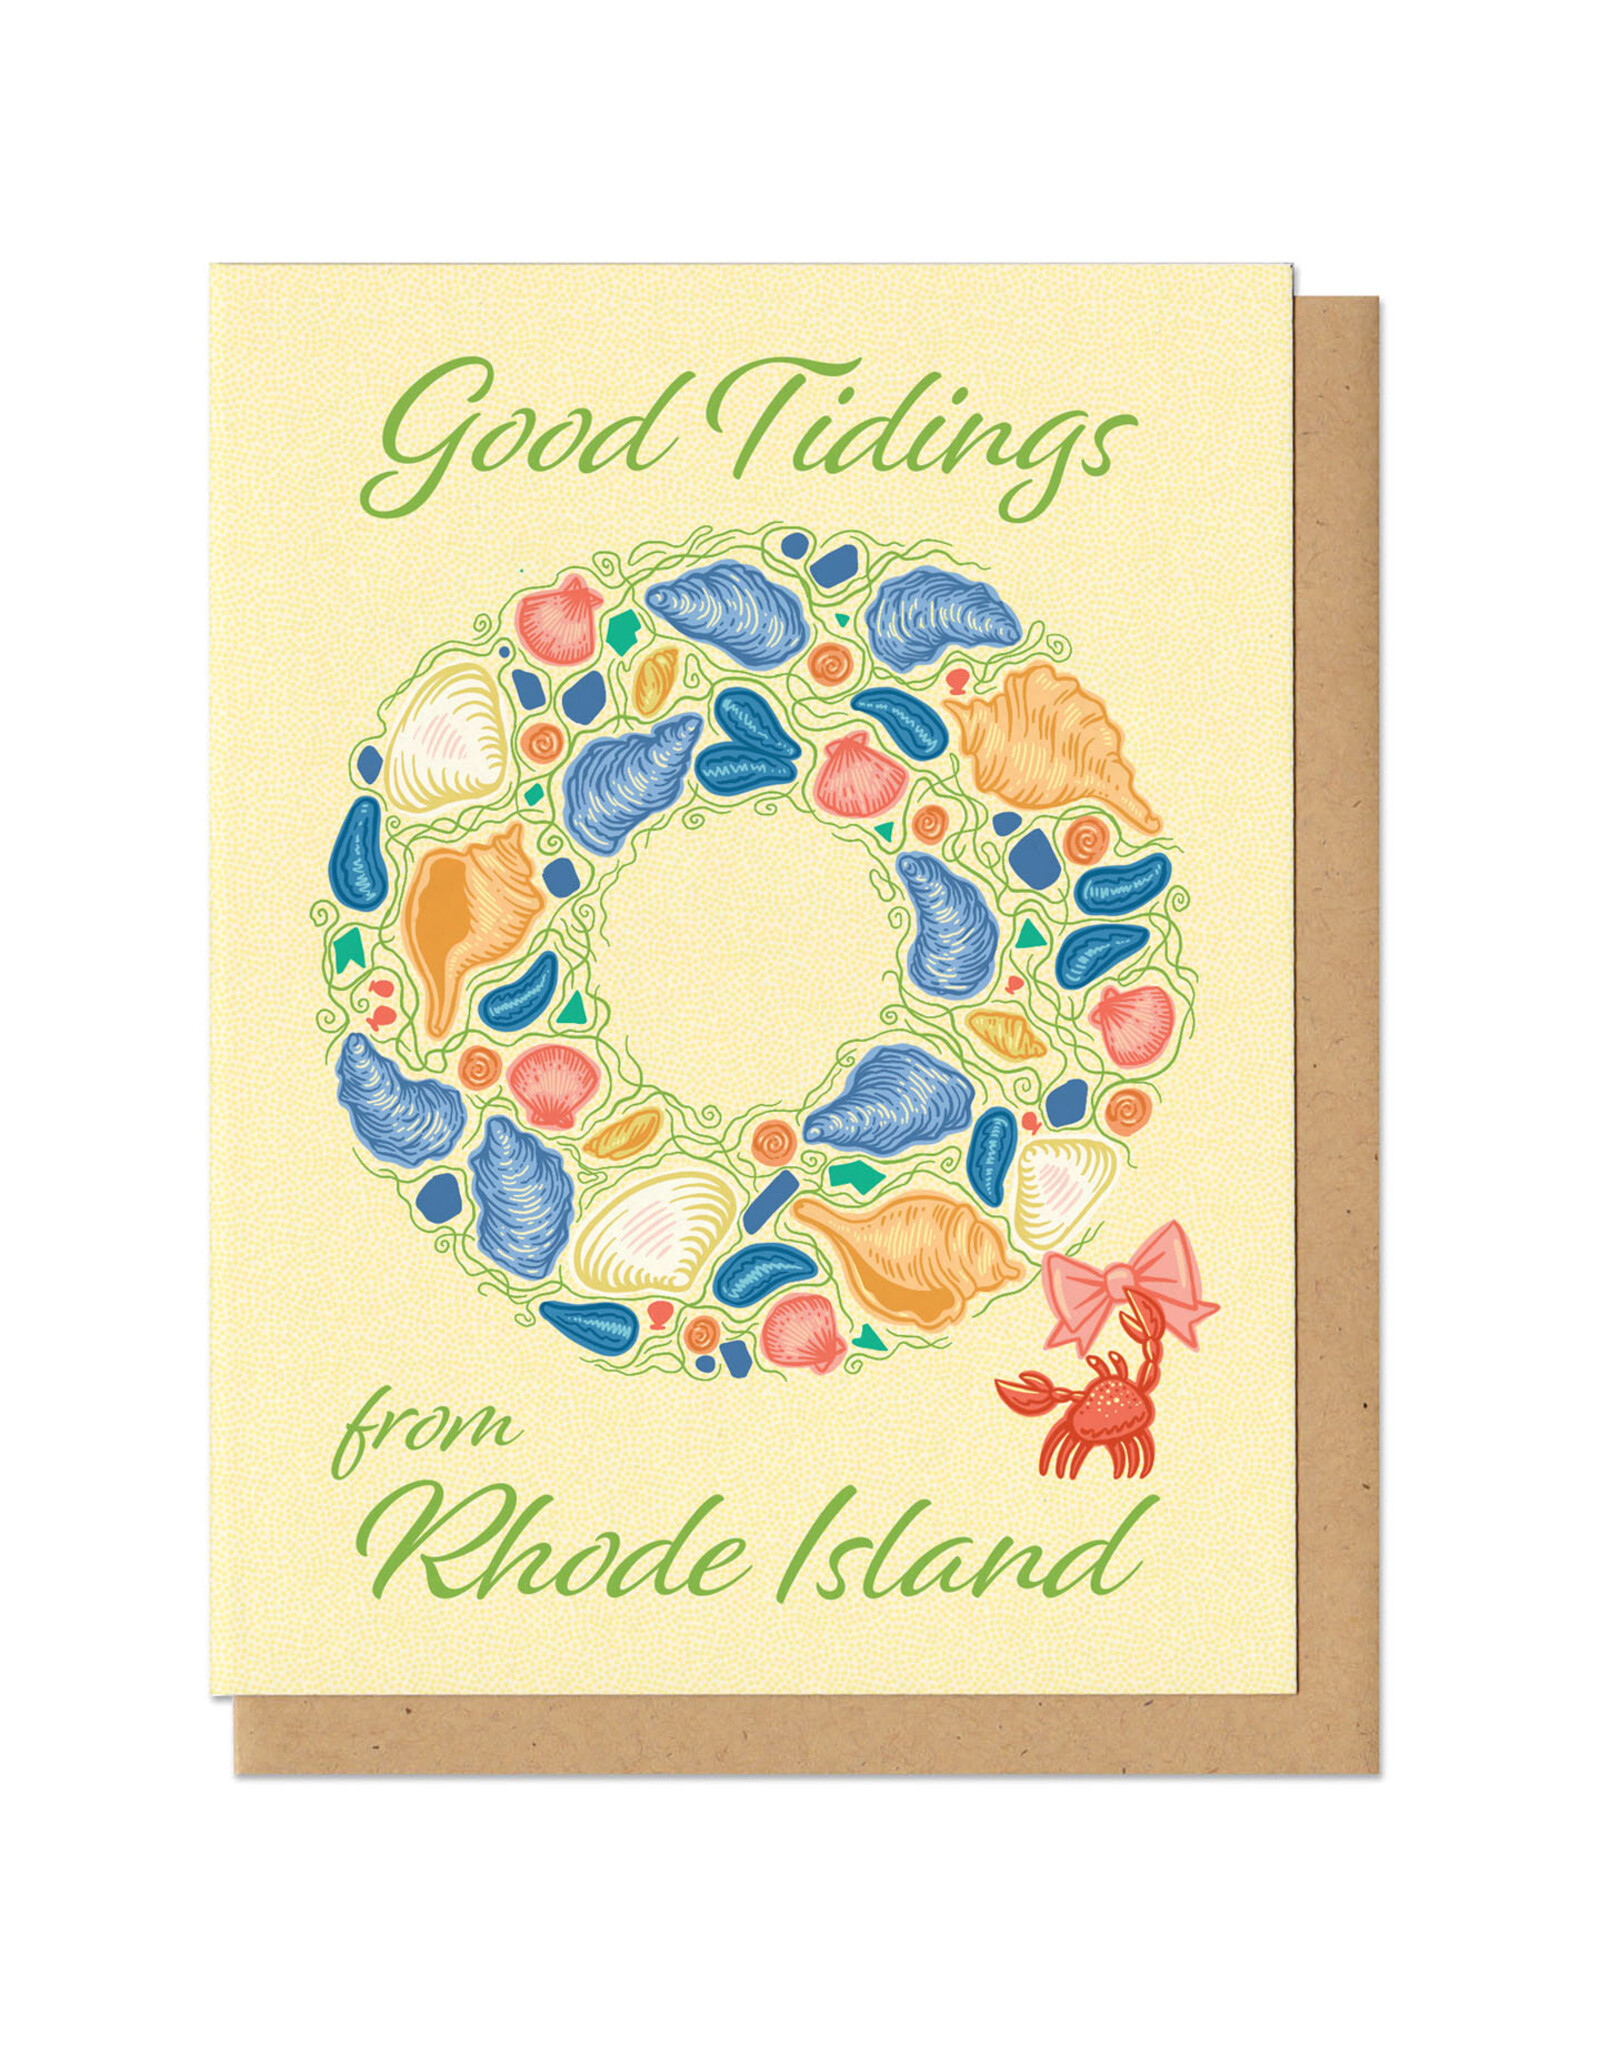 Good Tidings from Rhode Island Boxed Card Set